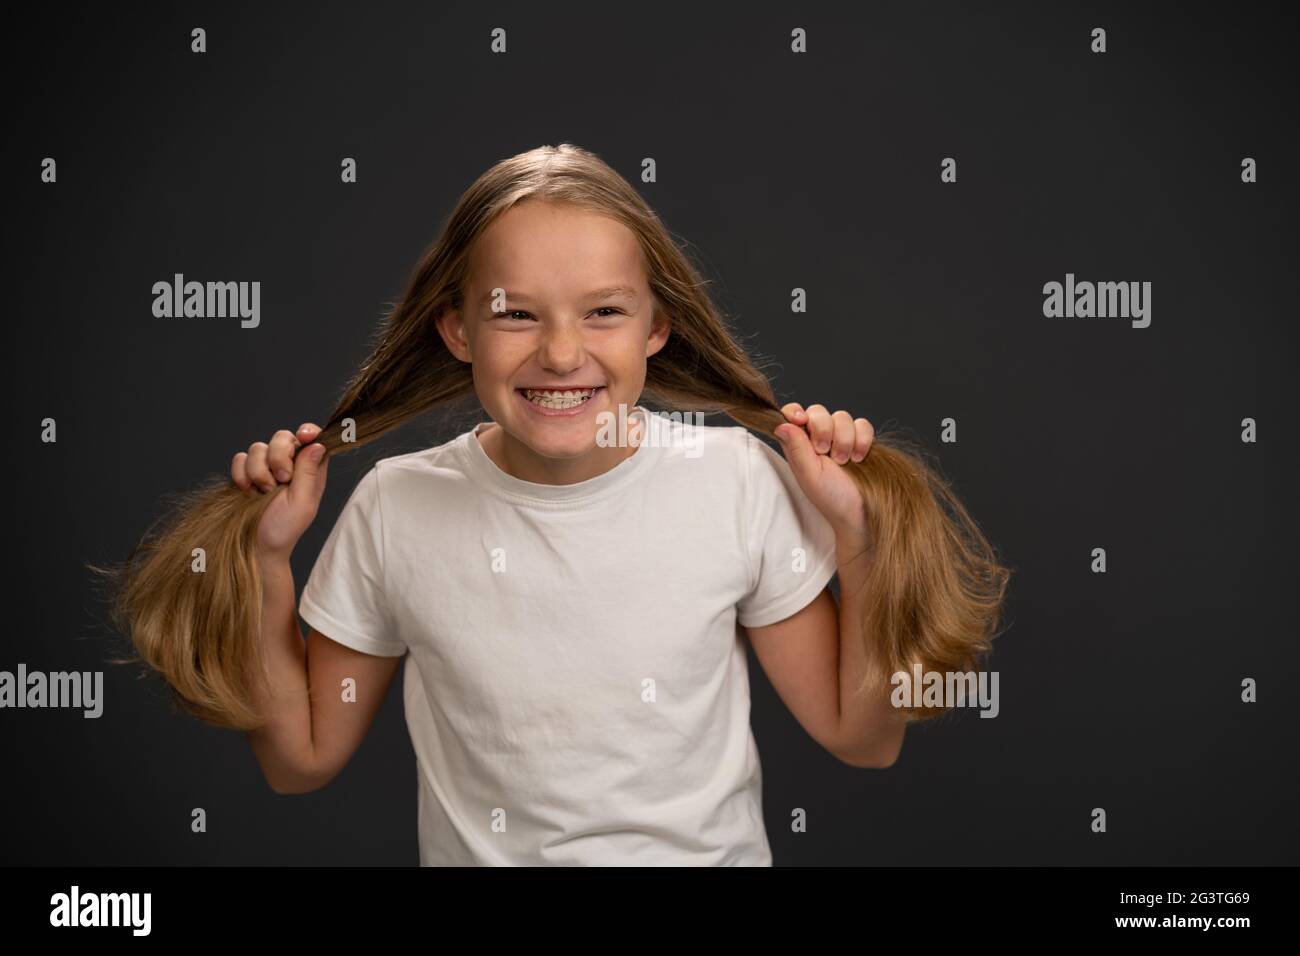 Happy smiling and holding two pony tails 8,10 years old girl holding her hair wearing white t shirt smiling a little grinning at Stock Photo